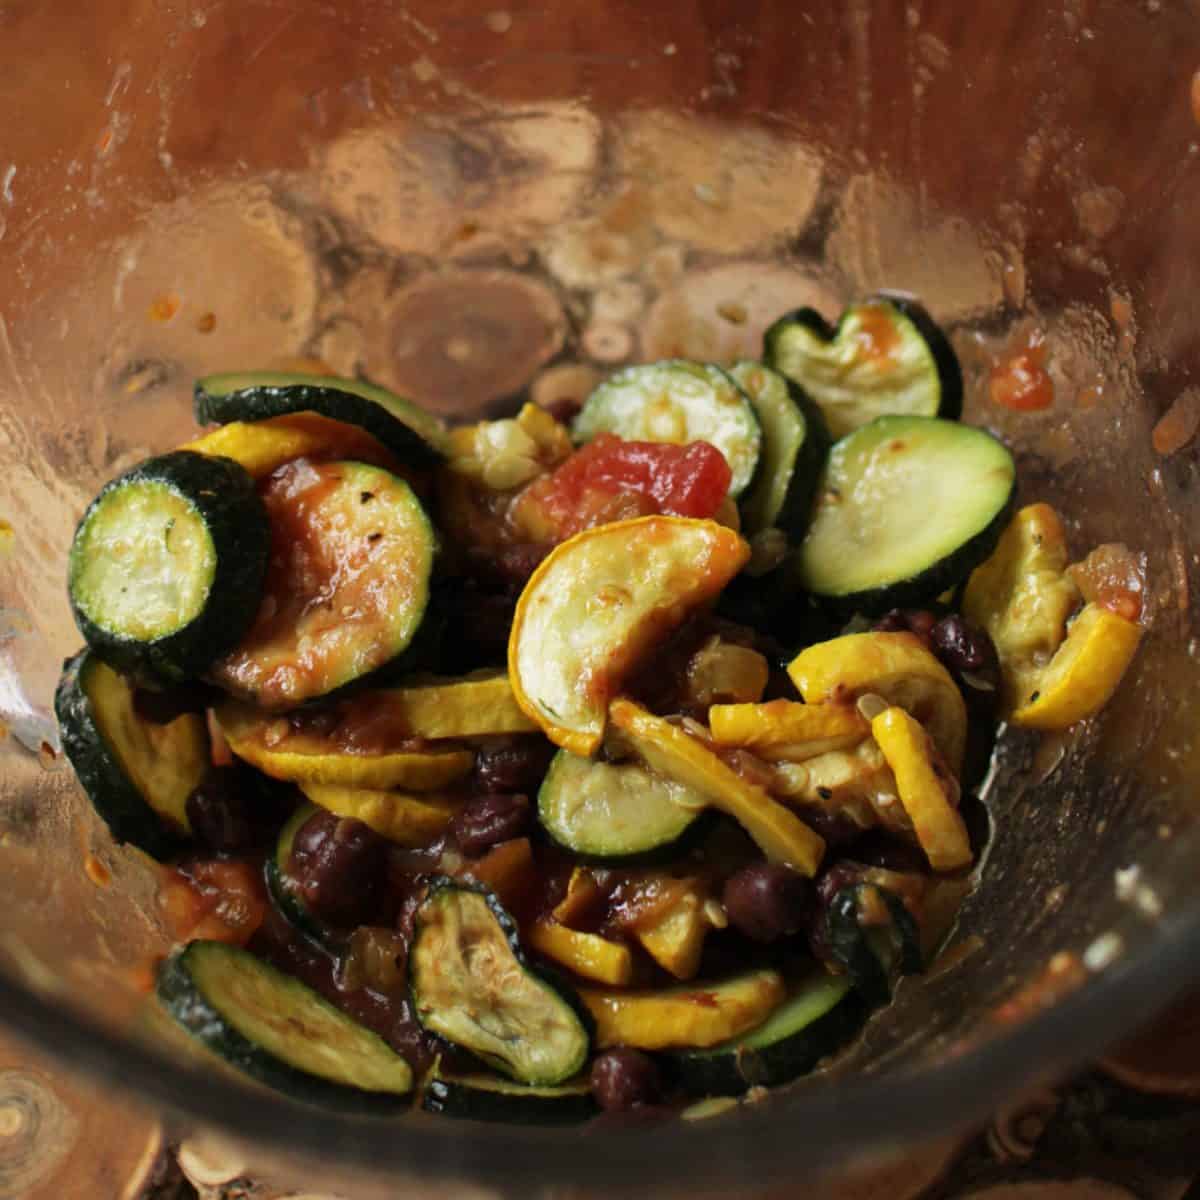 a bowl of cooked summer squash and zucchini.